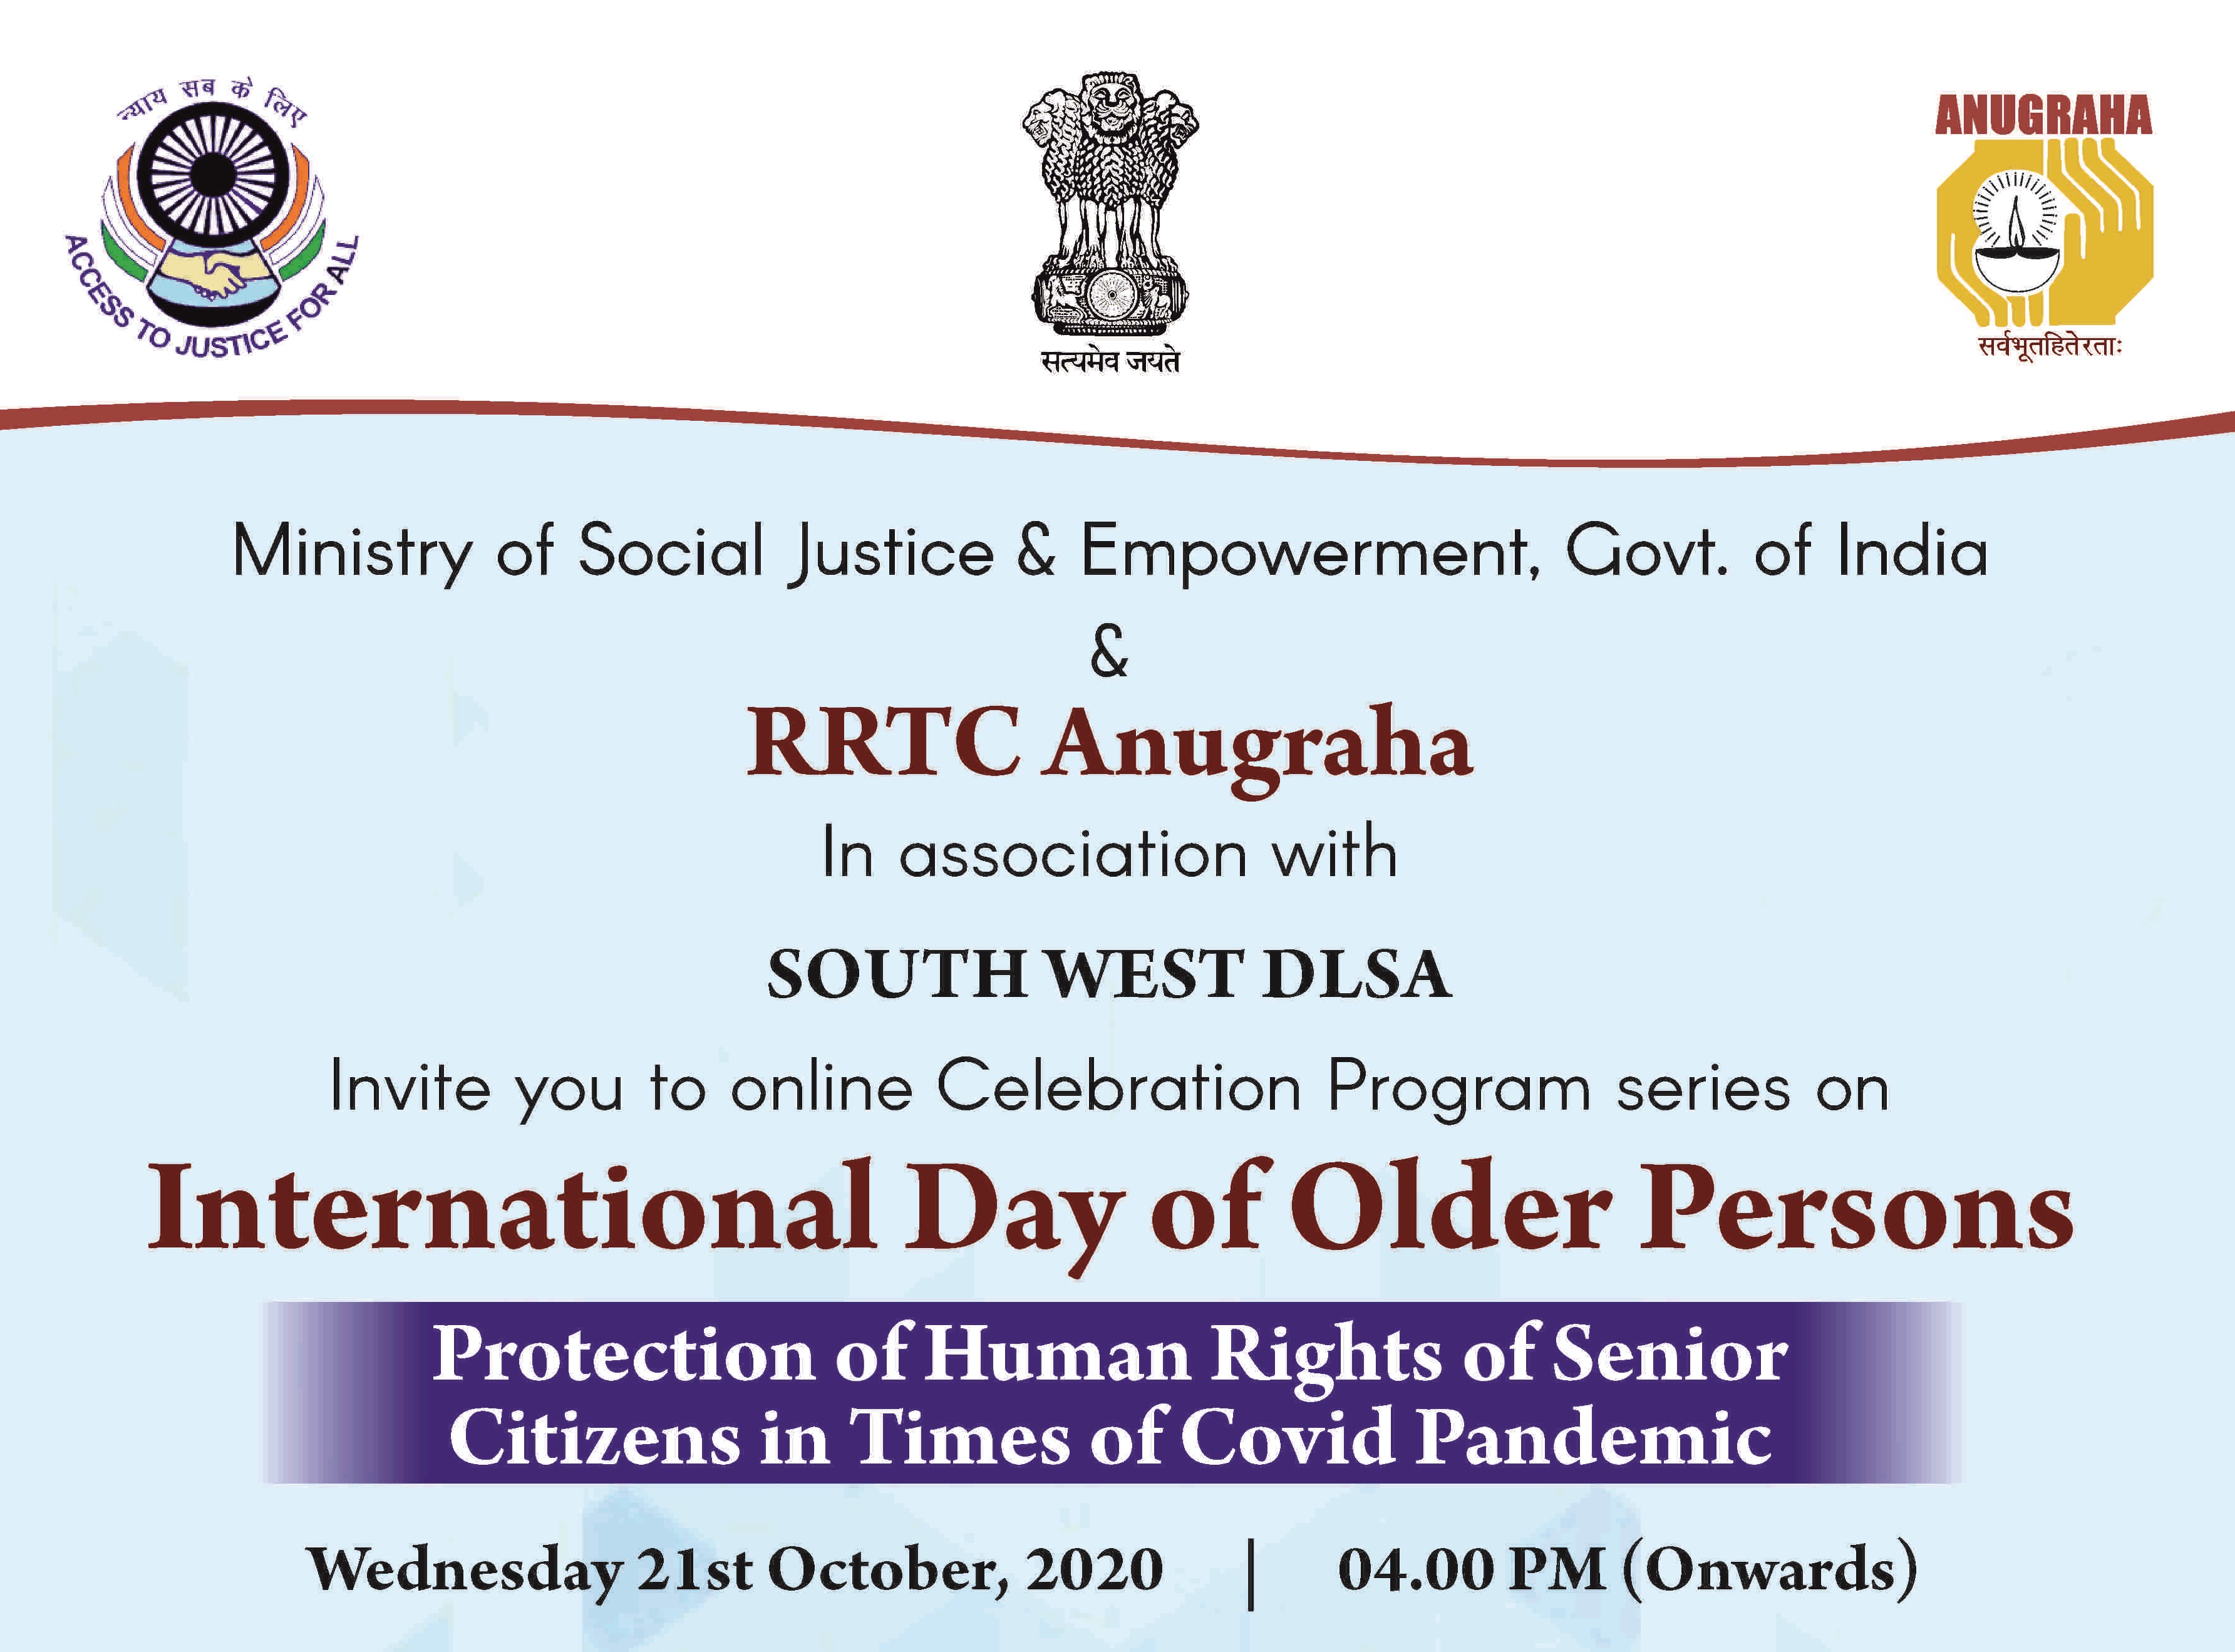 MSJE & Anugraha Event: Human Rights Of Senior Citizens During COVID-19 [21st Oct]